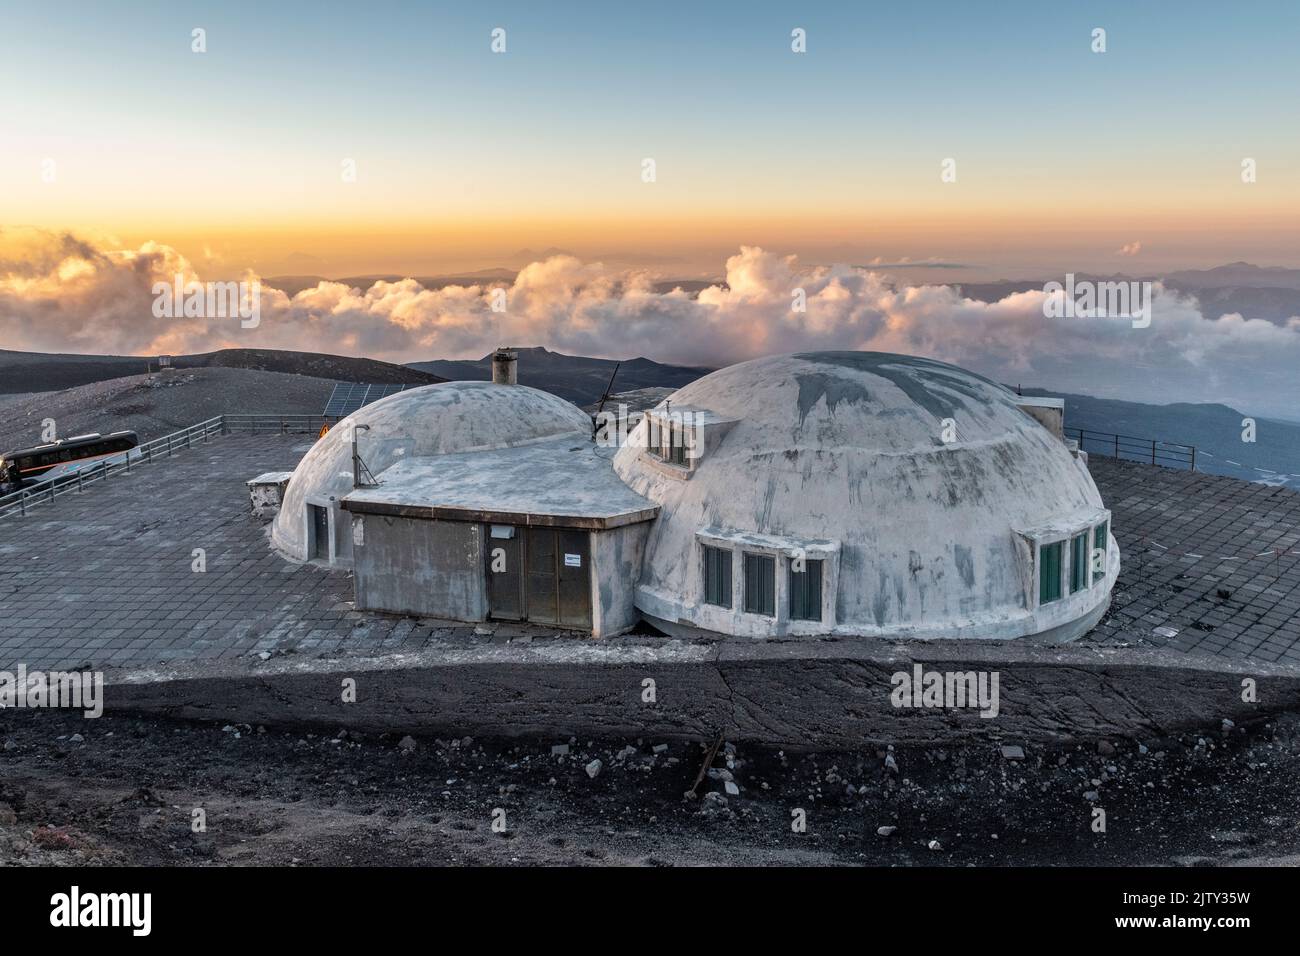 The volcanological observatory of Pizzi Deneri at 2800m on Mount Etna, Sicily, Italy, seen at sunset Stock Photo